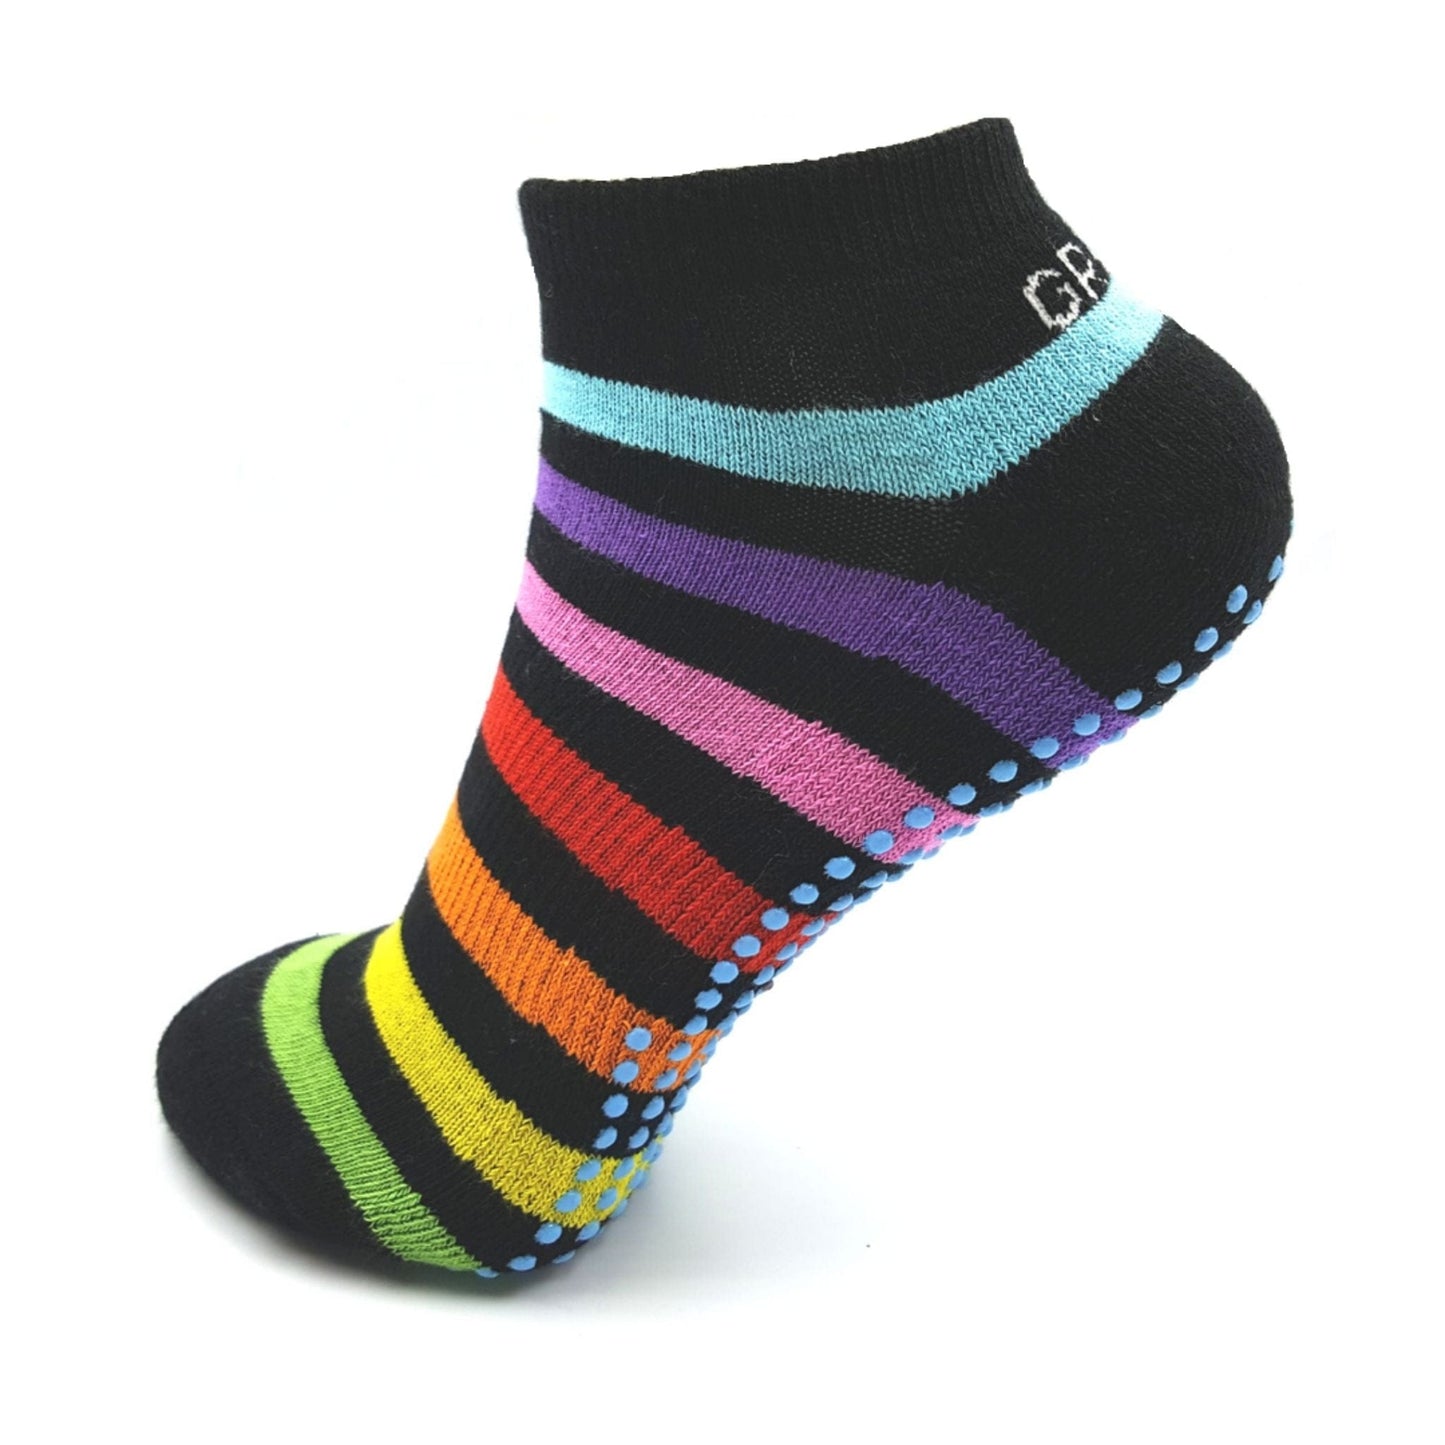 Gripperz Adult Grip Socks - Non Slip Active Ankle Socks - Caring Clothing